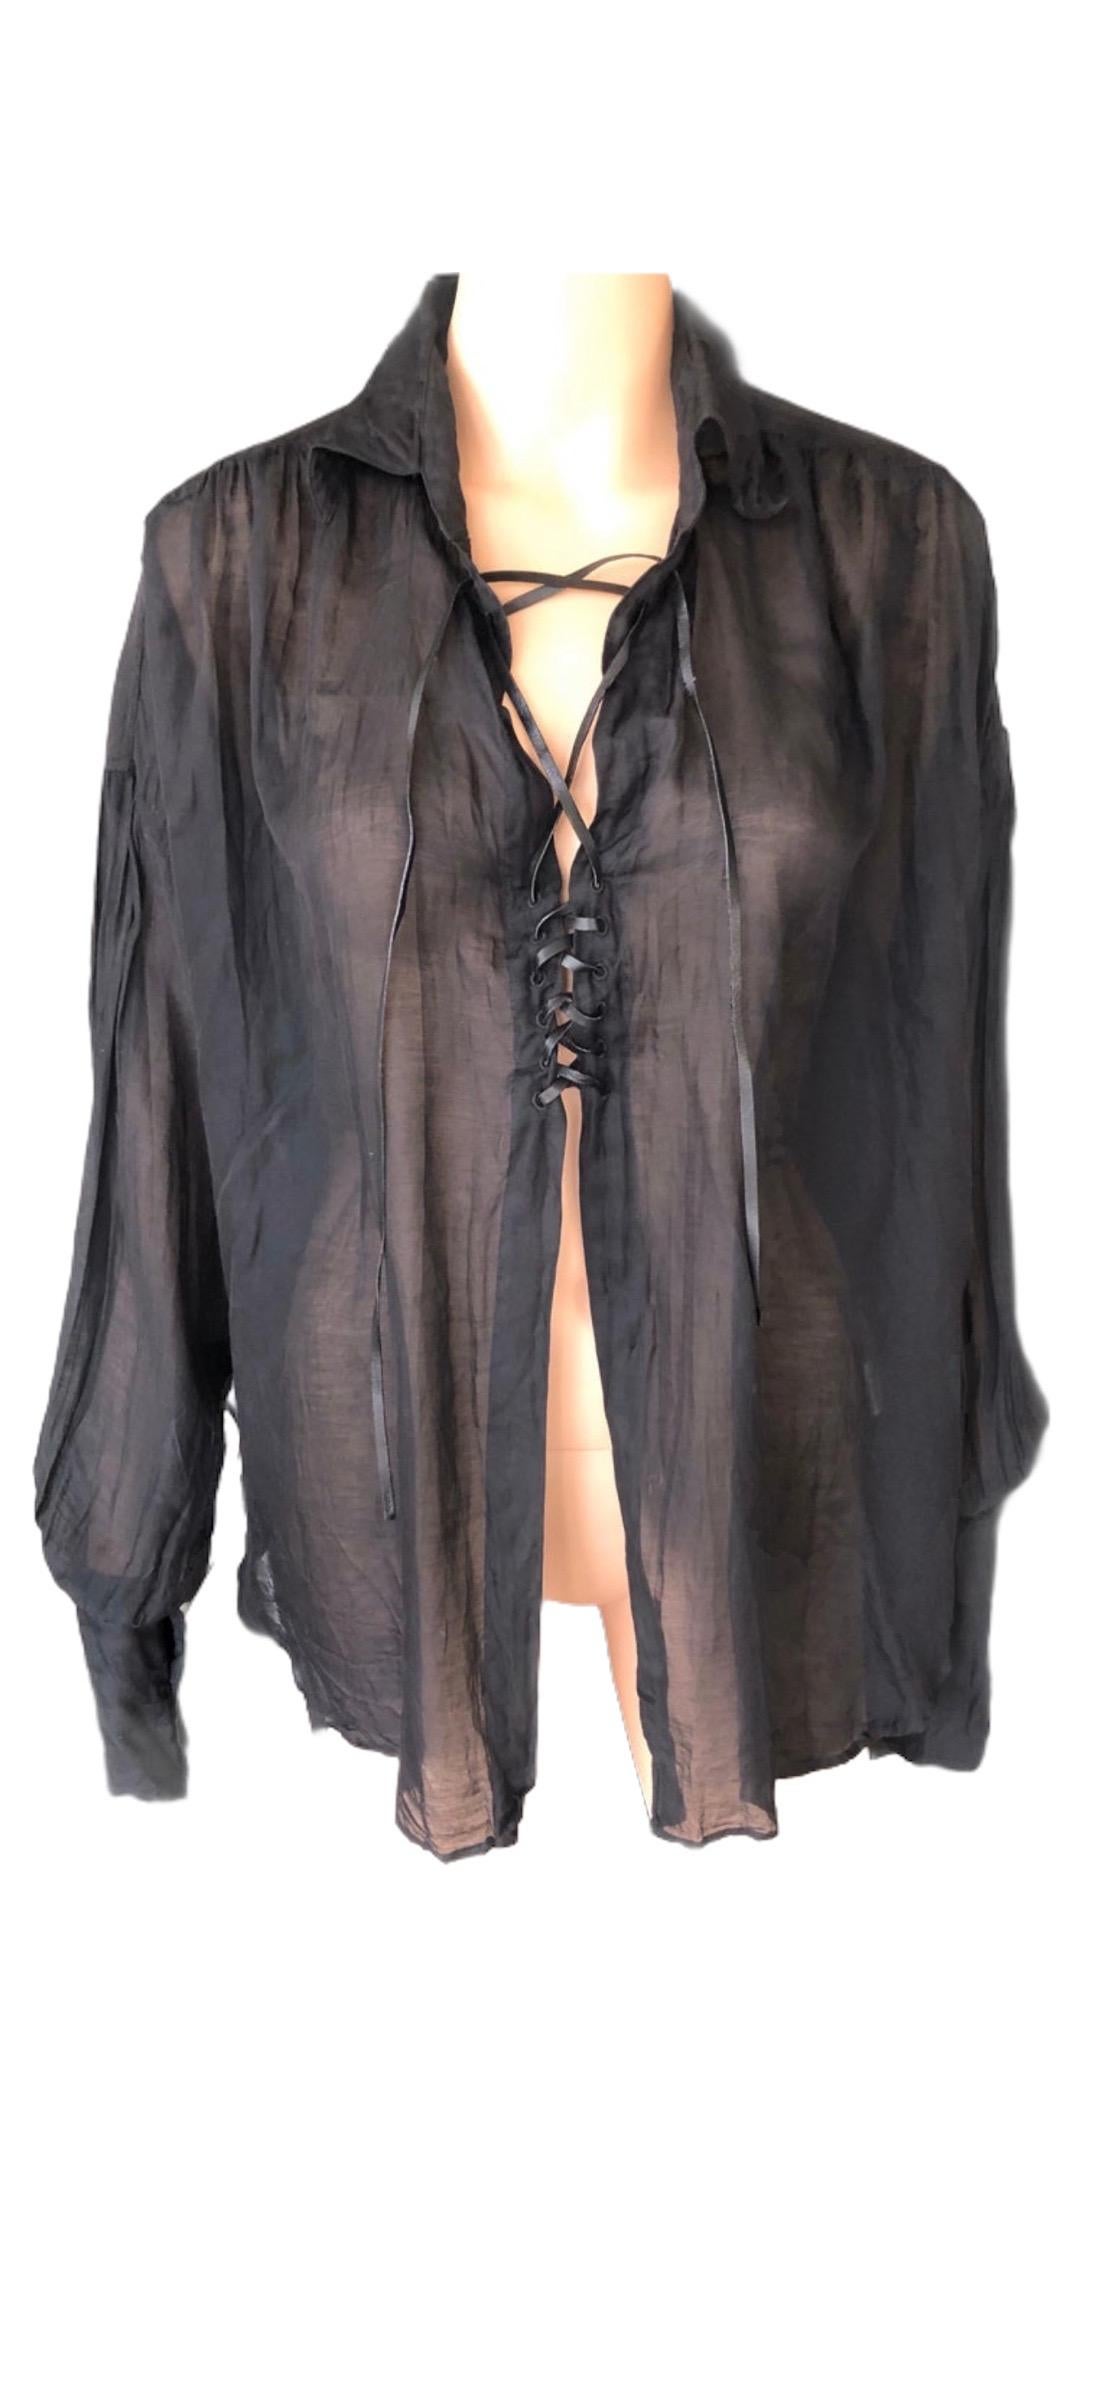 Tom Ford for Gucci F/W 2002 Sheer Plunging Lace-Up Black Tunic Shirt Blouse Top In Good Condition In Naples, FL